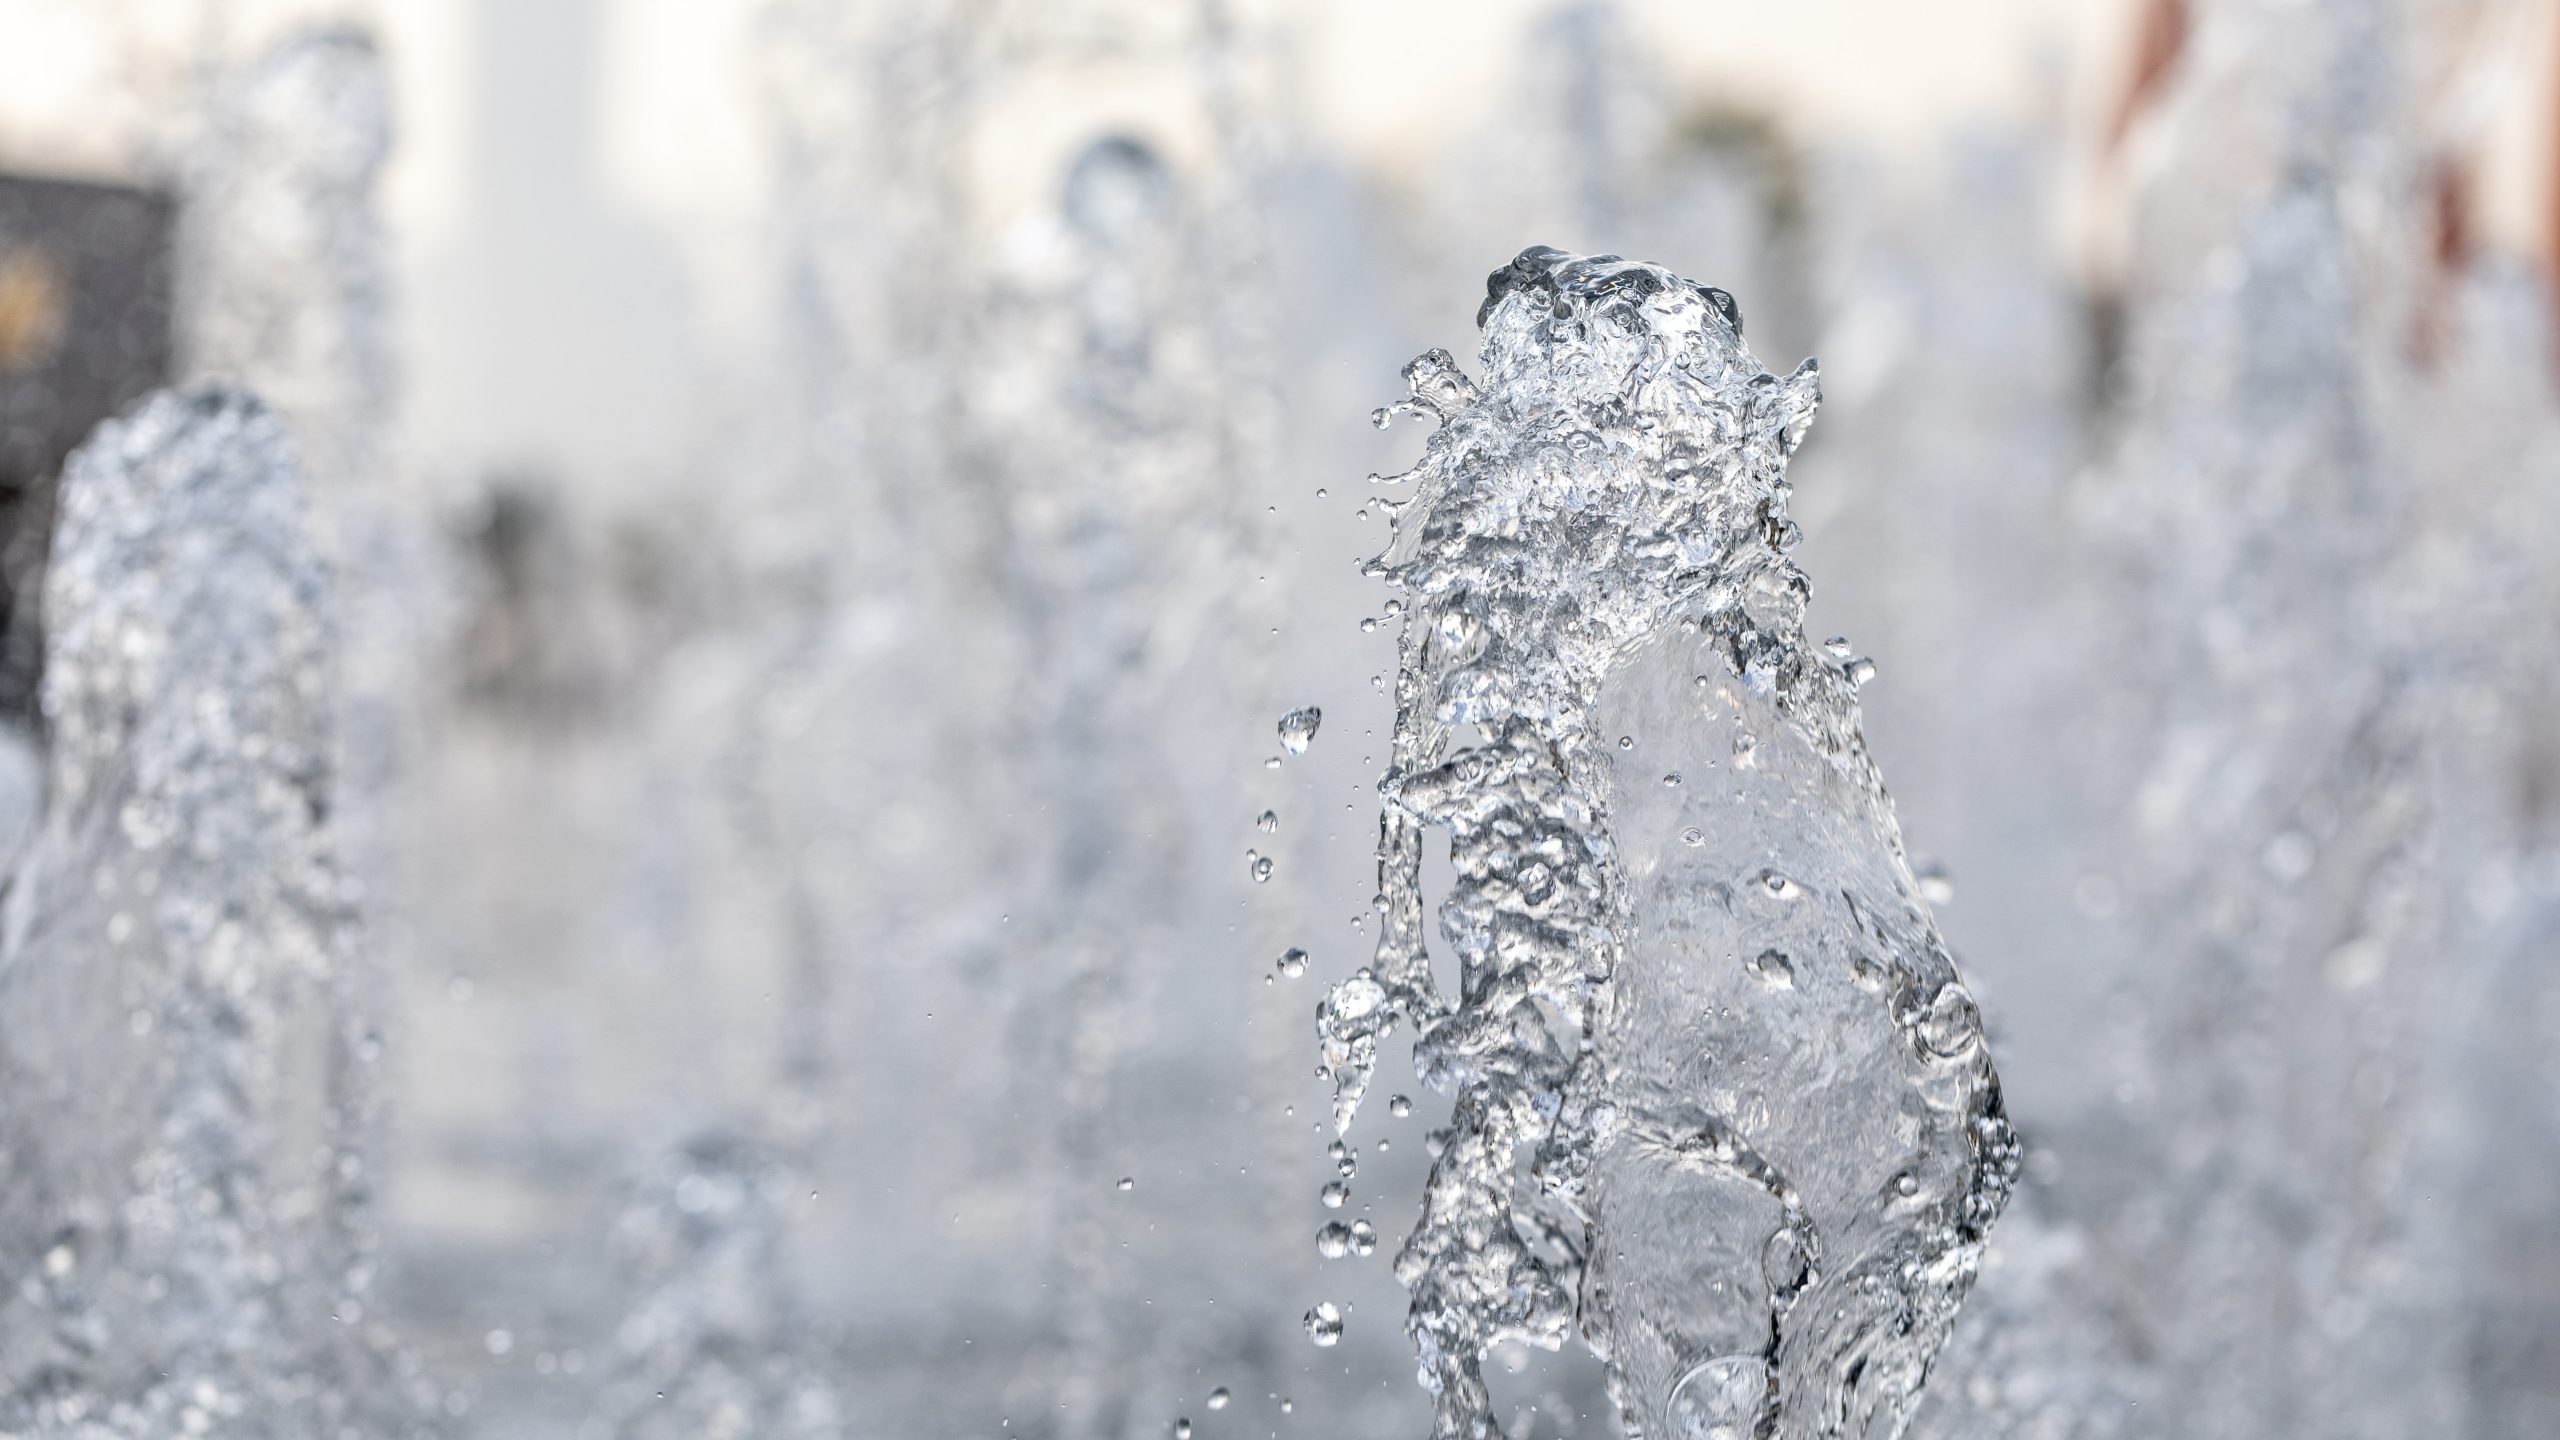 Water stopped or frozen for a photo using high speed shutter time. Photographer Tuomas Harjumaaskola.